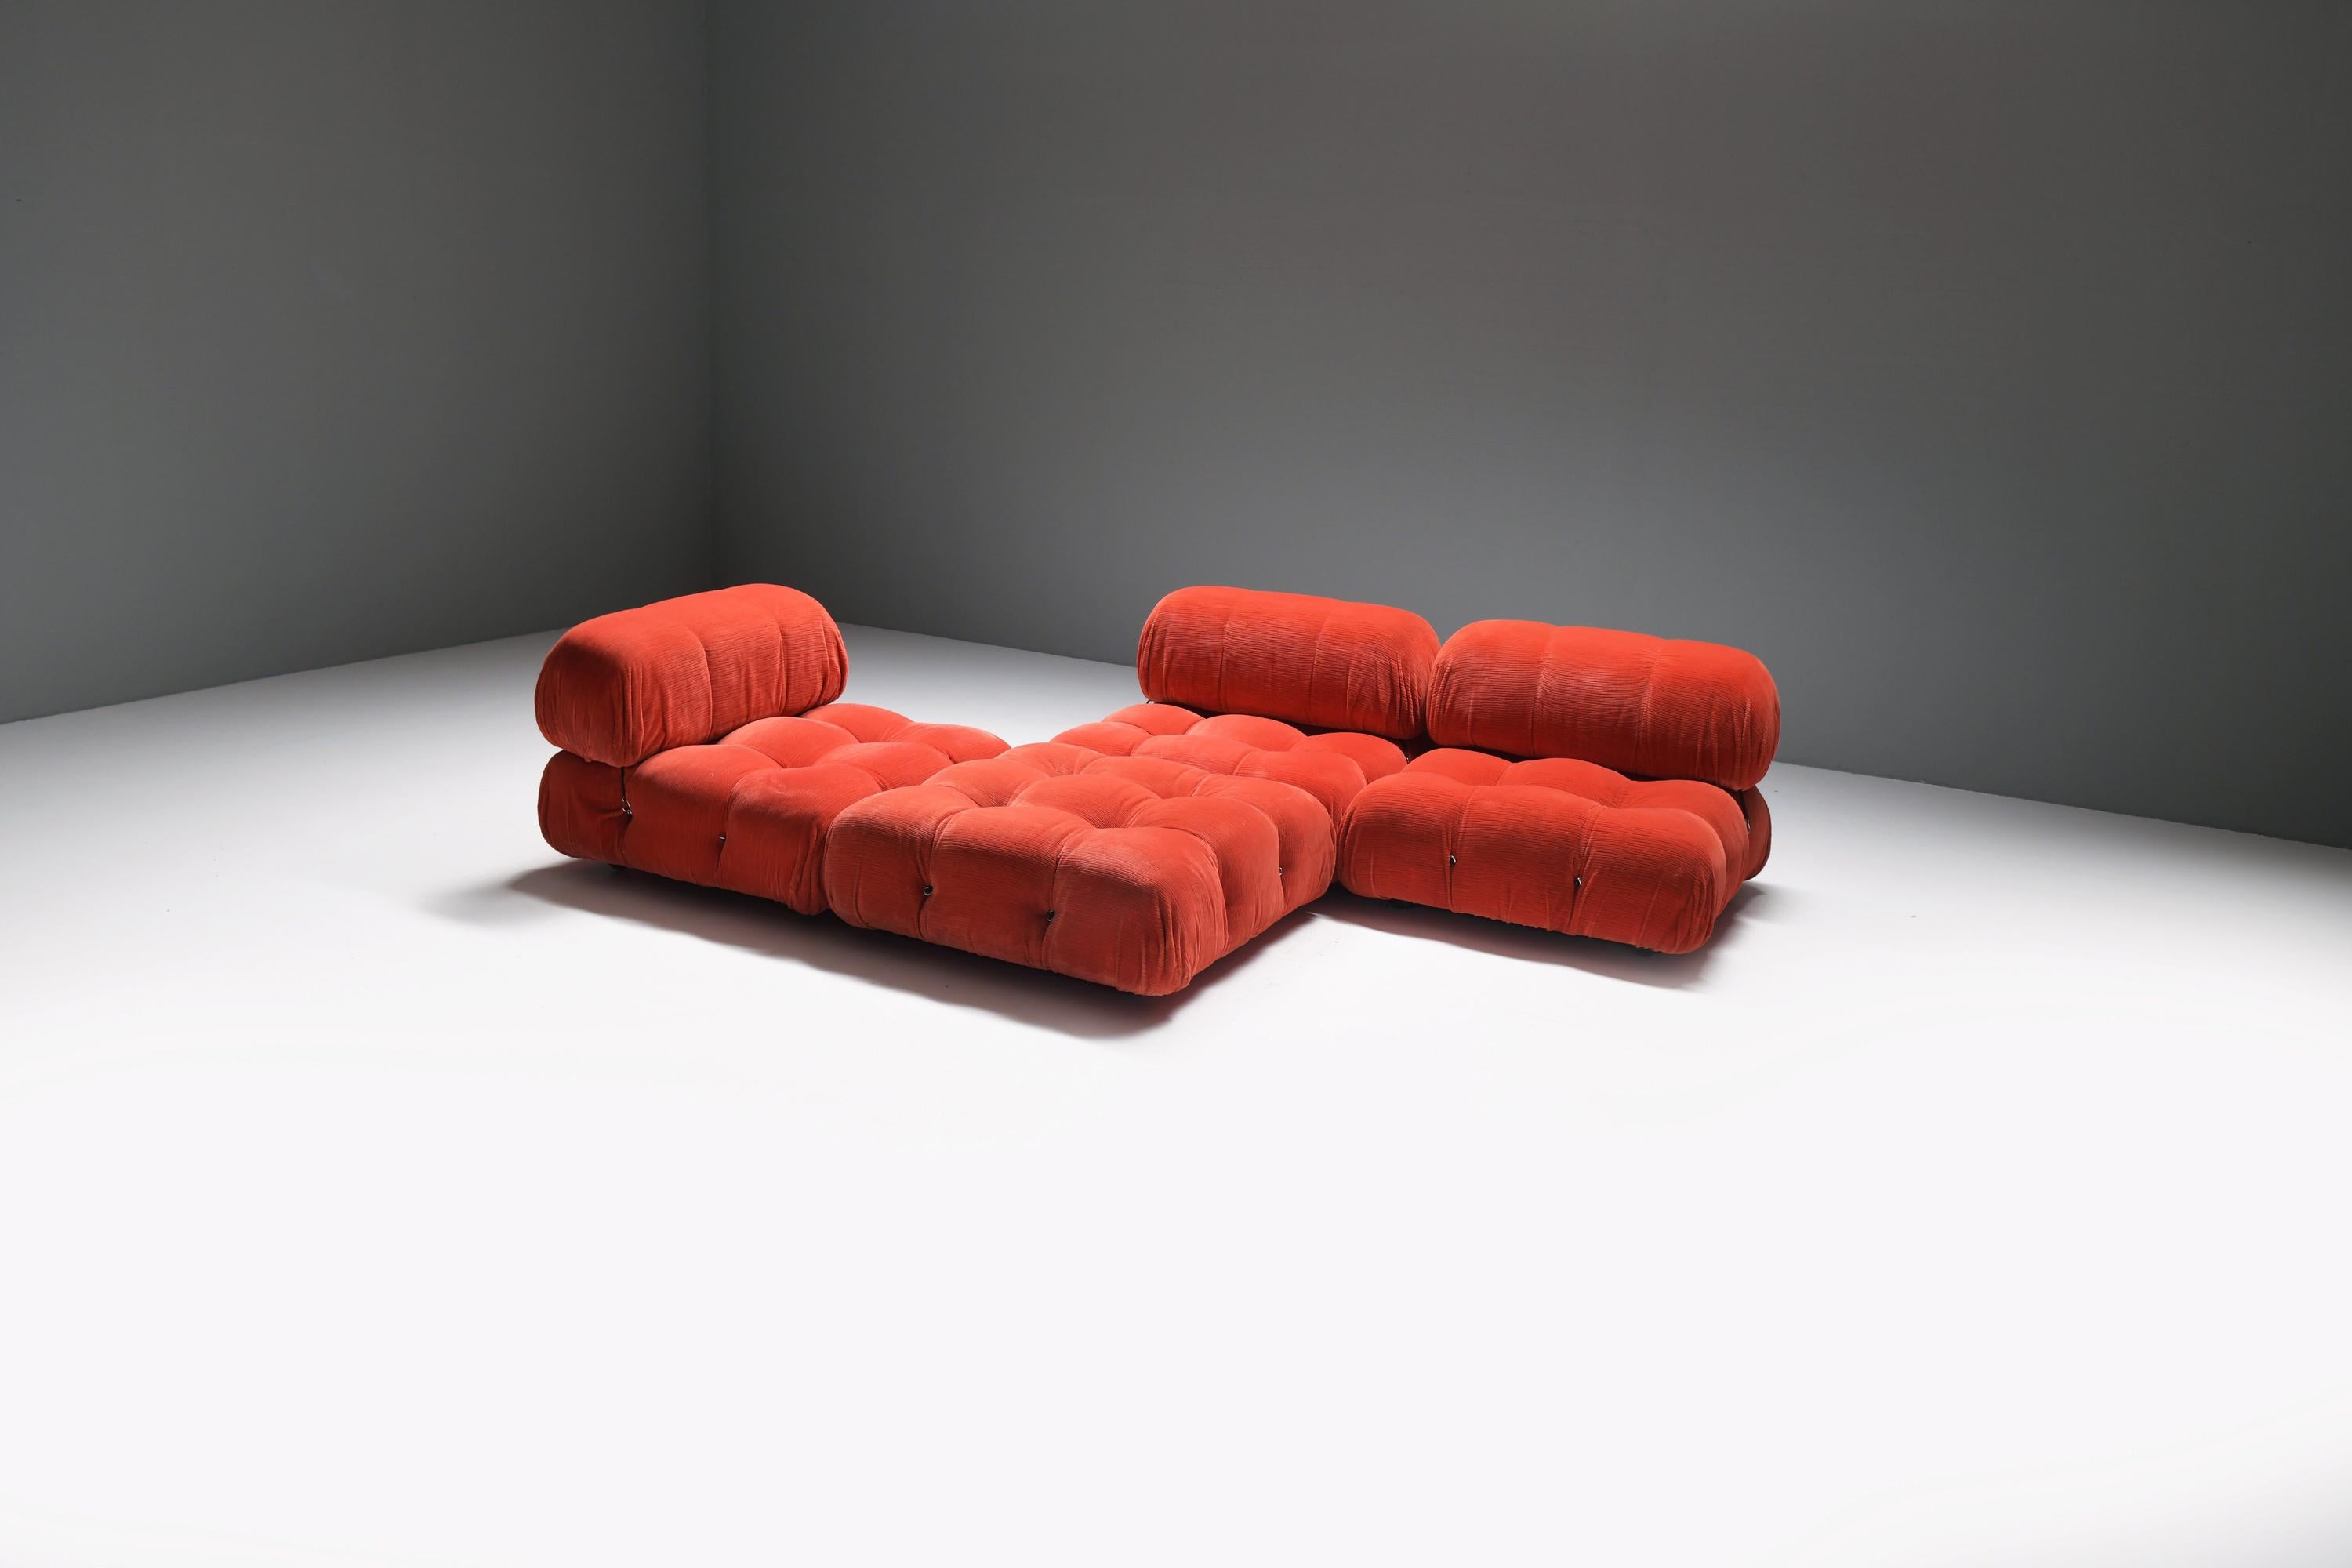 Exceptional matching Camaleonda set in its original coral corduroy.
Designed by Mario Bellini for B & B Italia.

The “Camaleonda” sofa is Mario Bellini’s contemporary classic. The playful, modular design offers endless options for the user, which